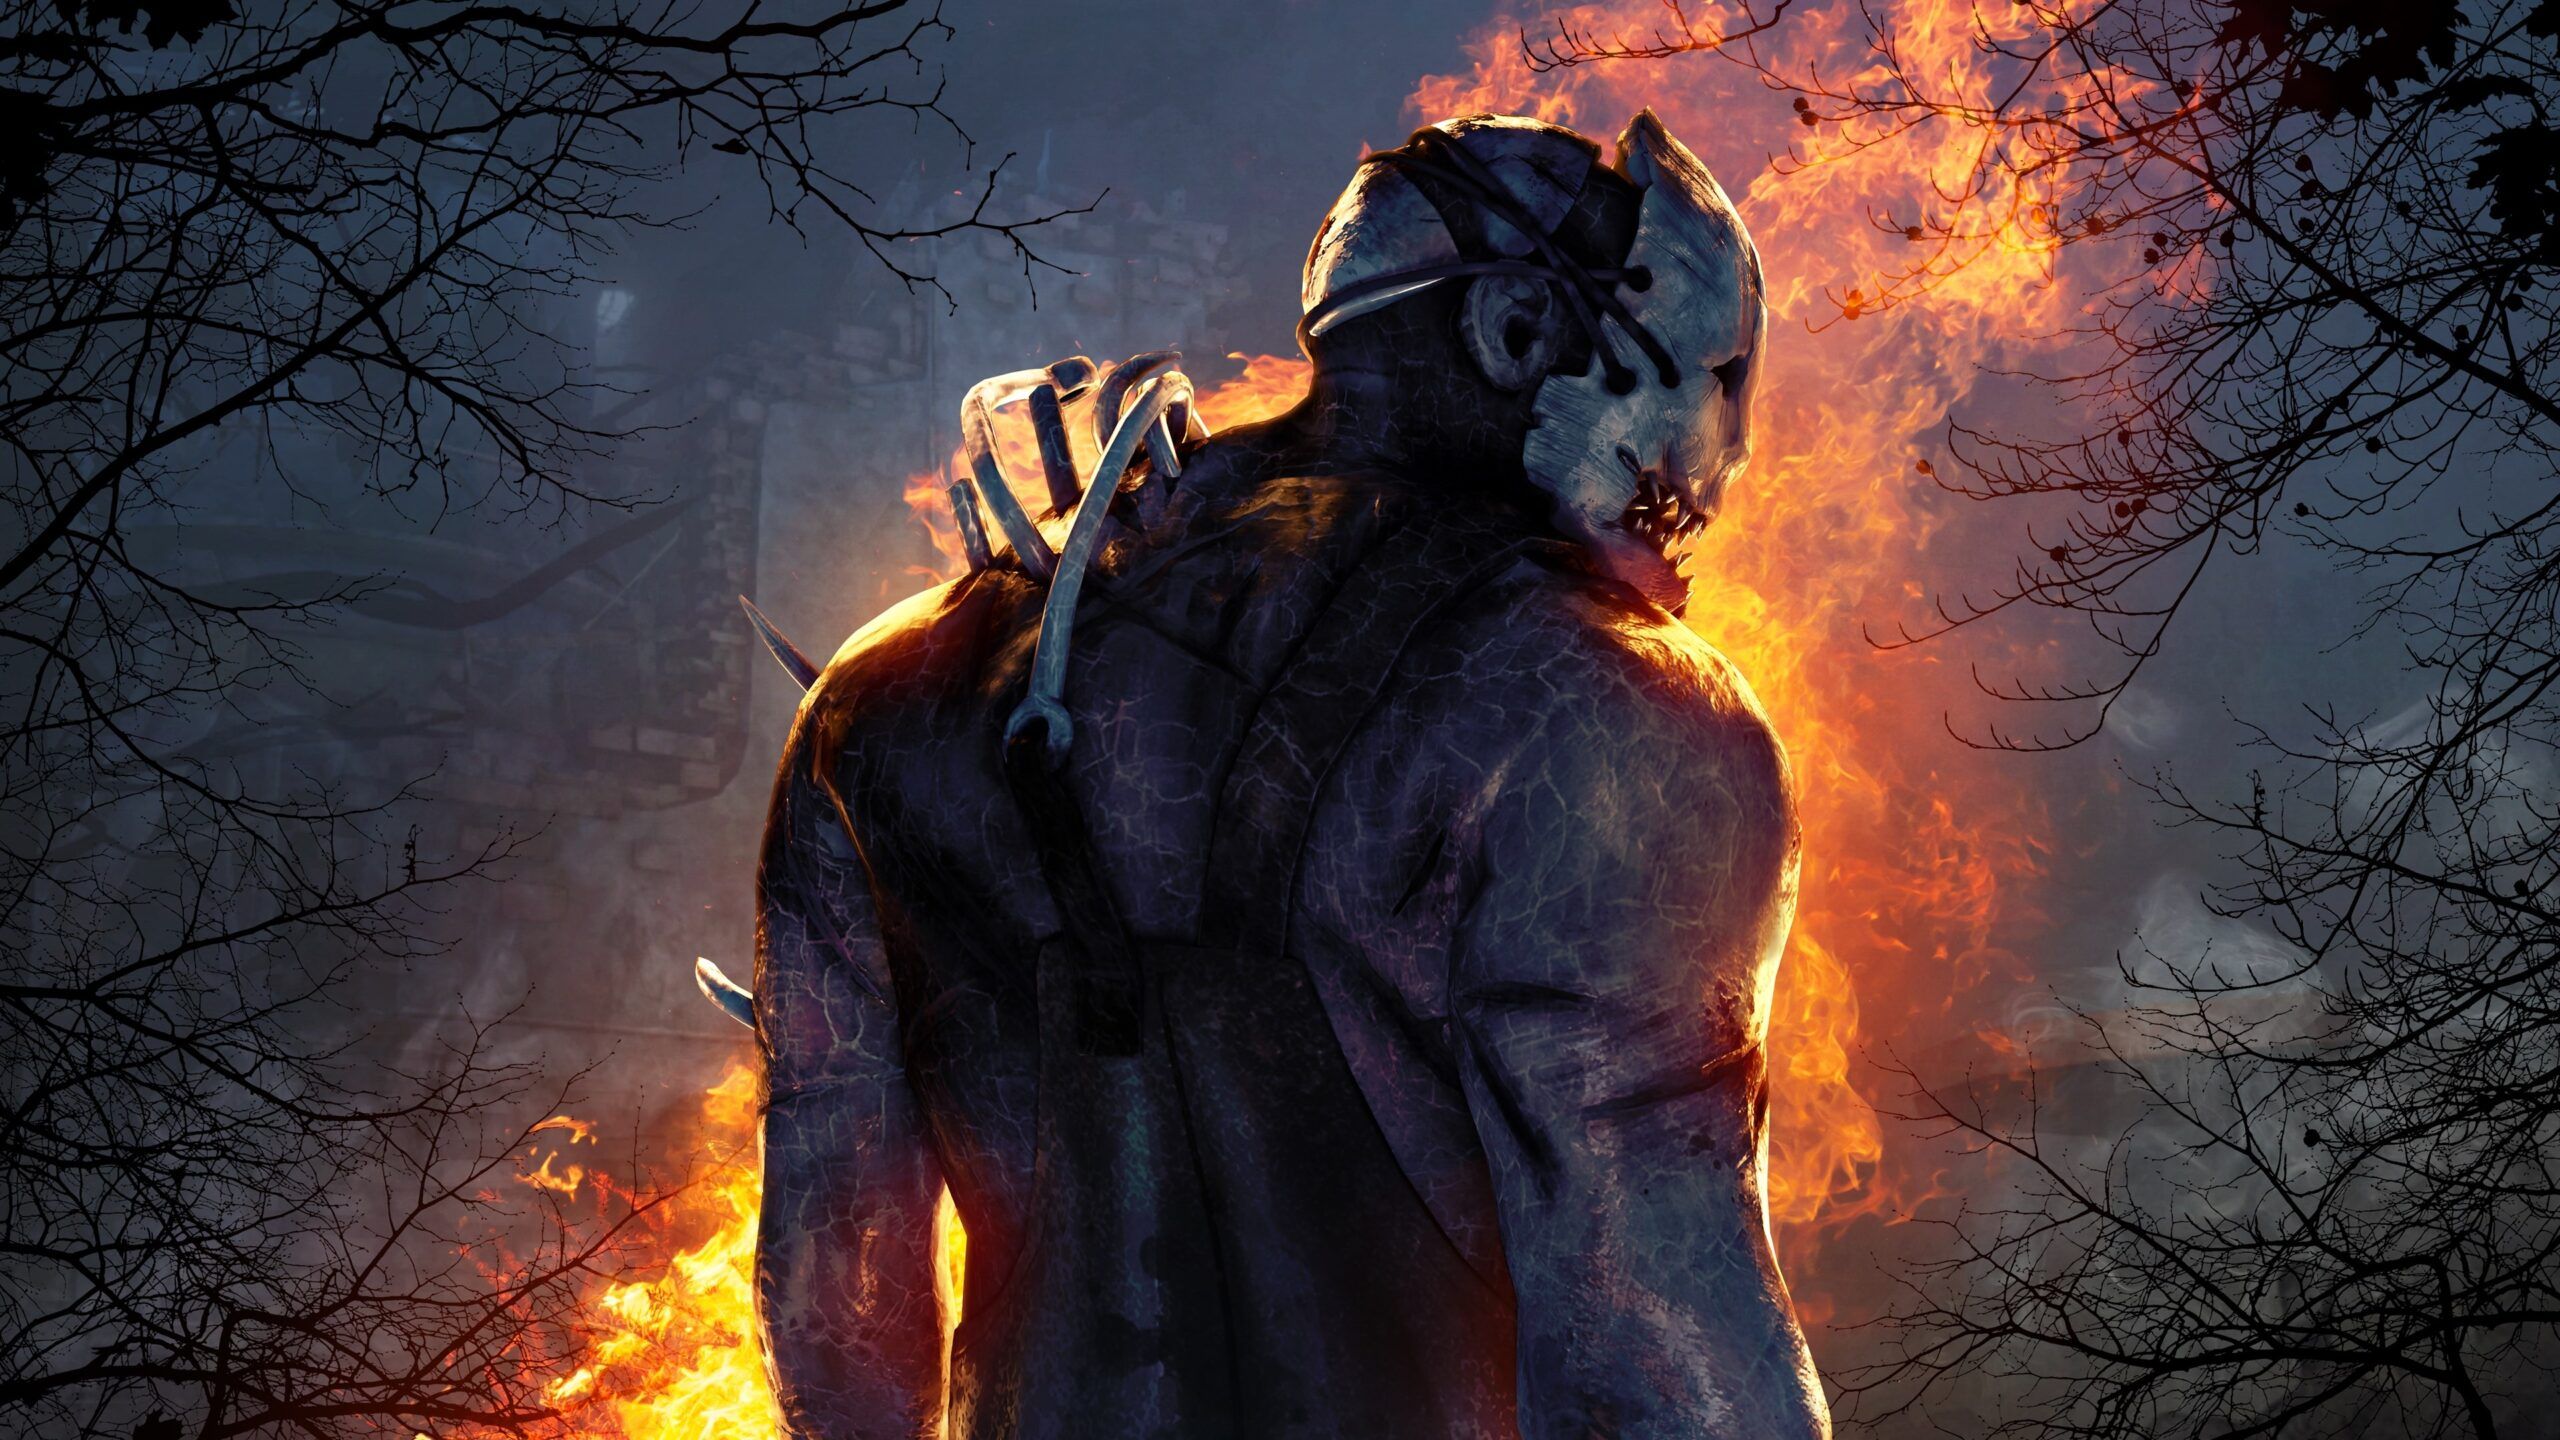 Dead By Daylight (DBD) Update 5.3.2 Patch Notes Today, November 2